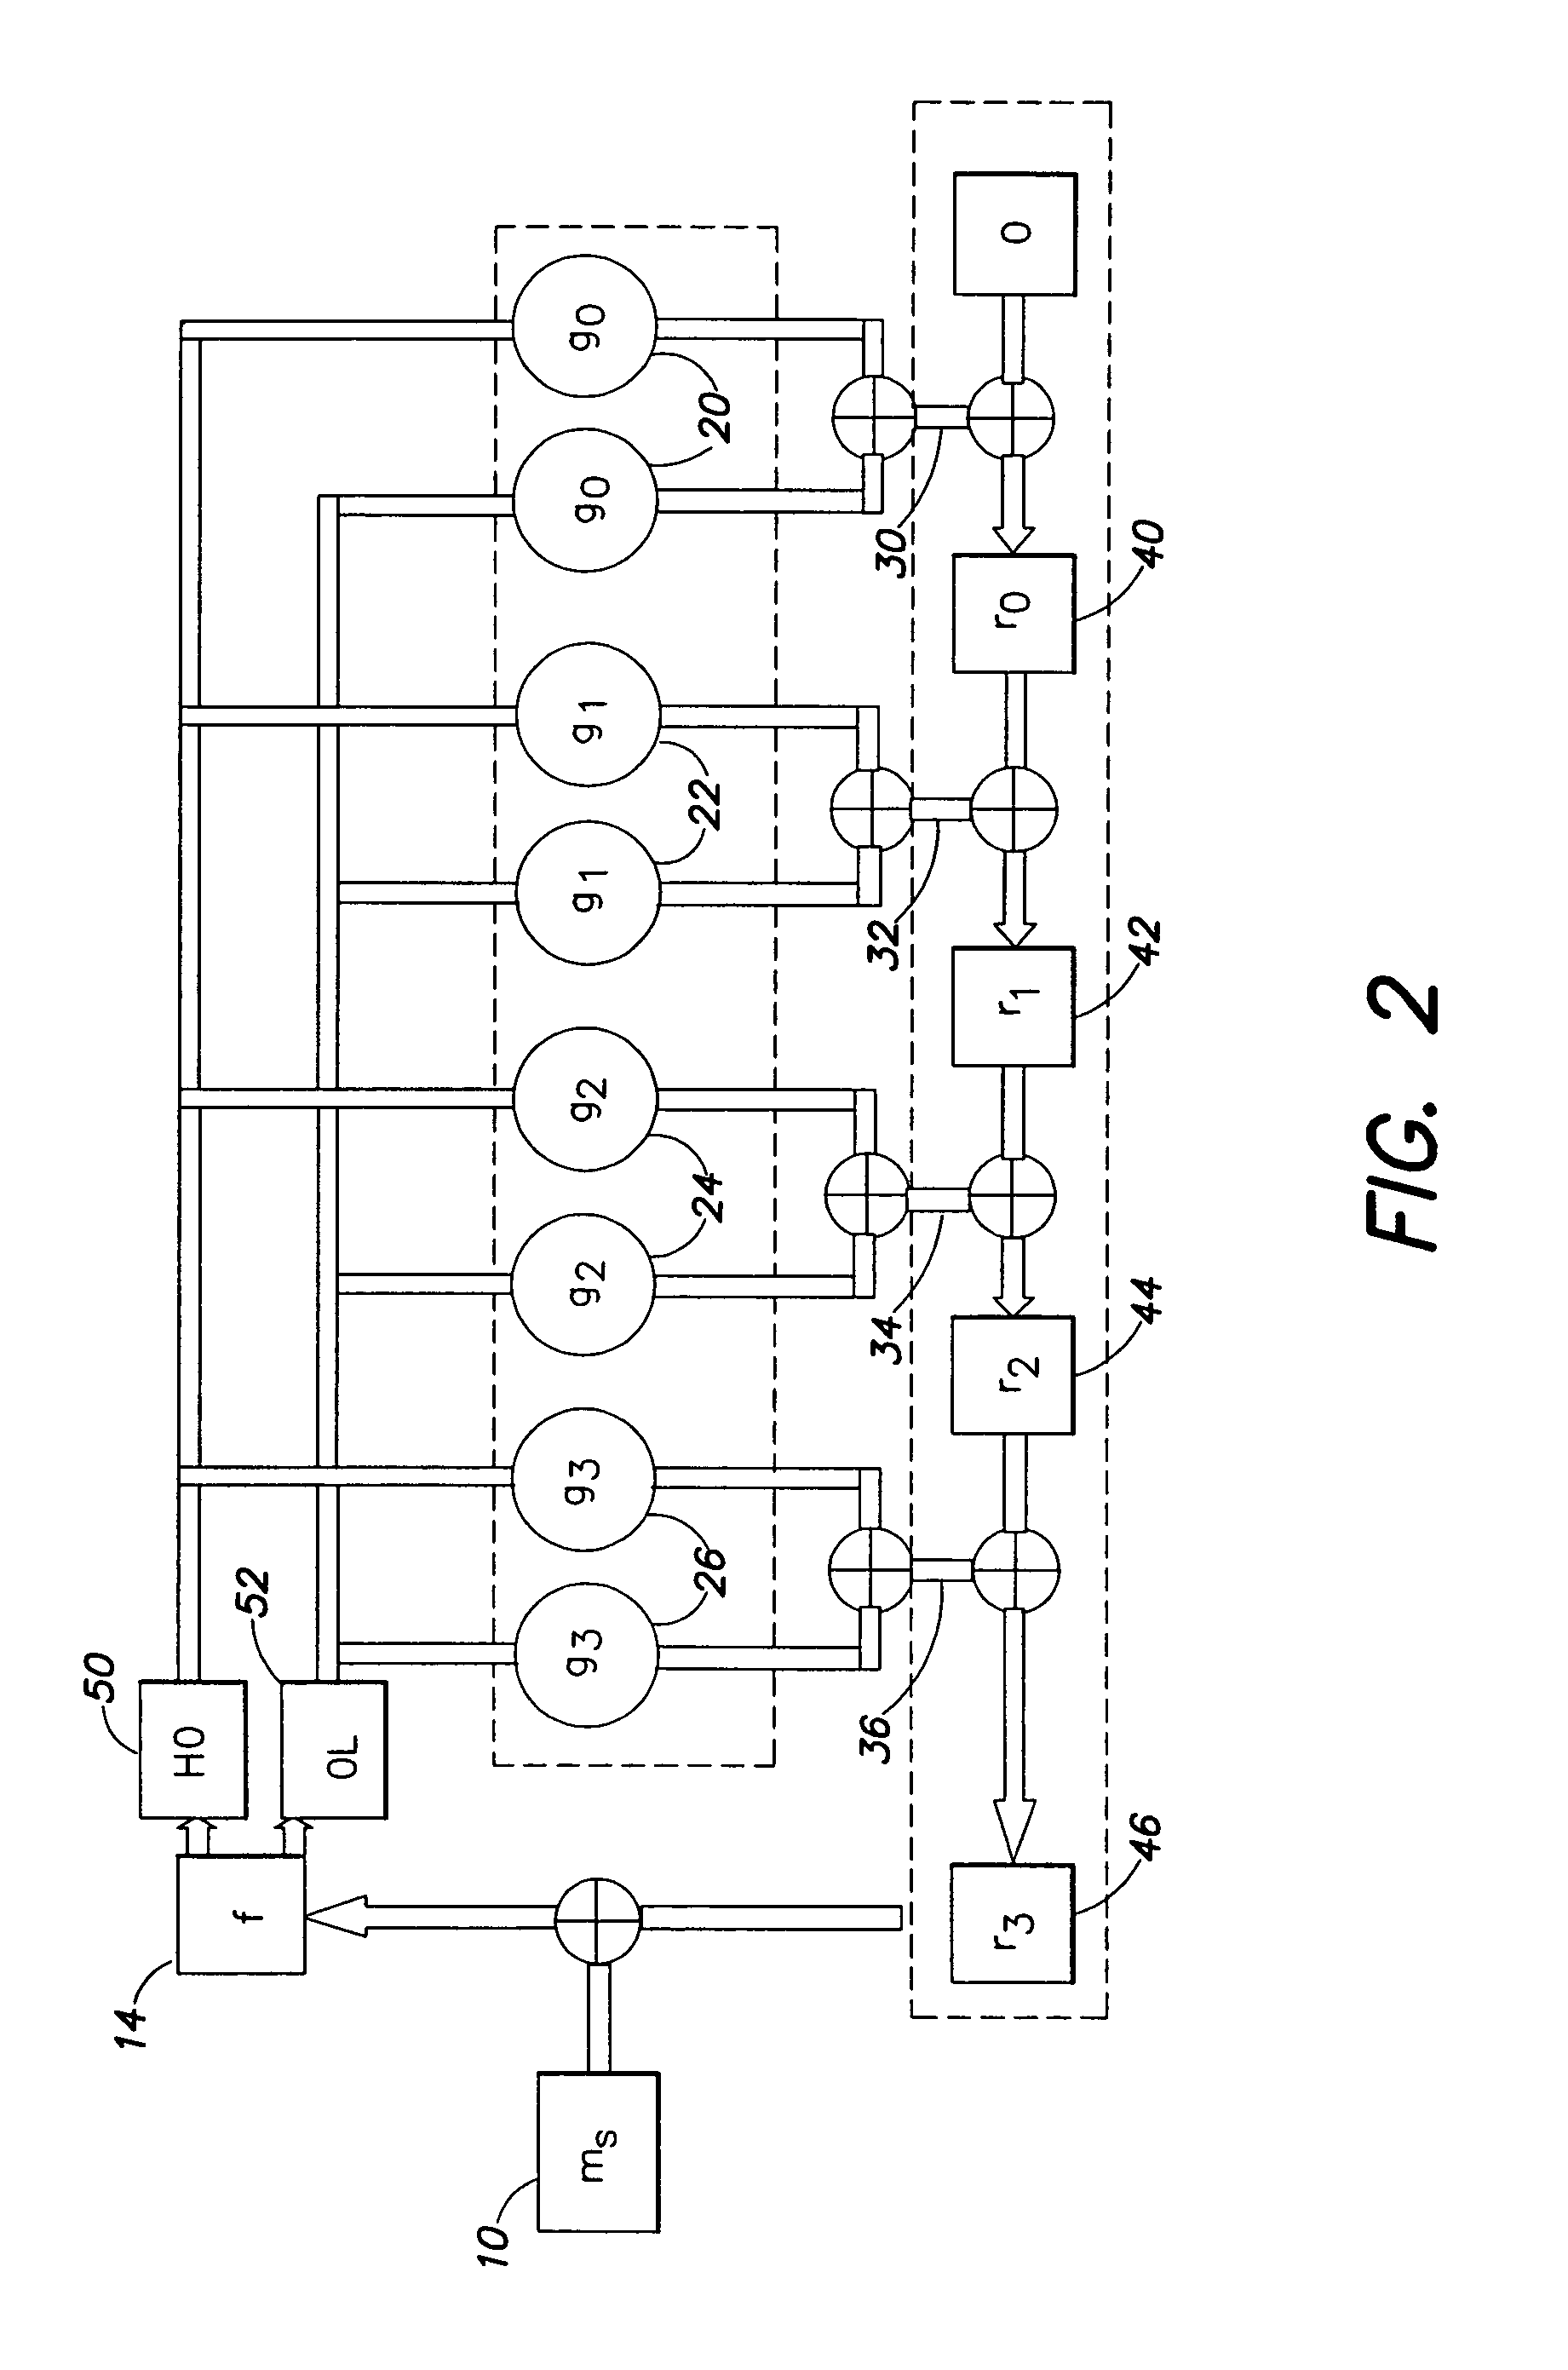 Methods and apparatus for coding and decoding data using Reed-Solomon codes